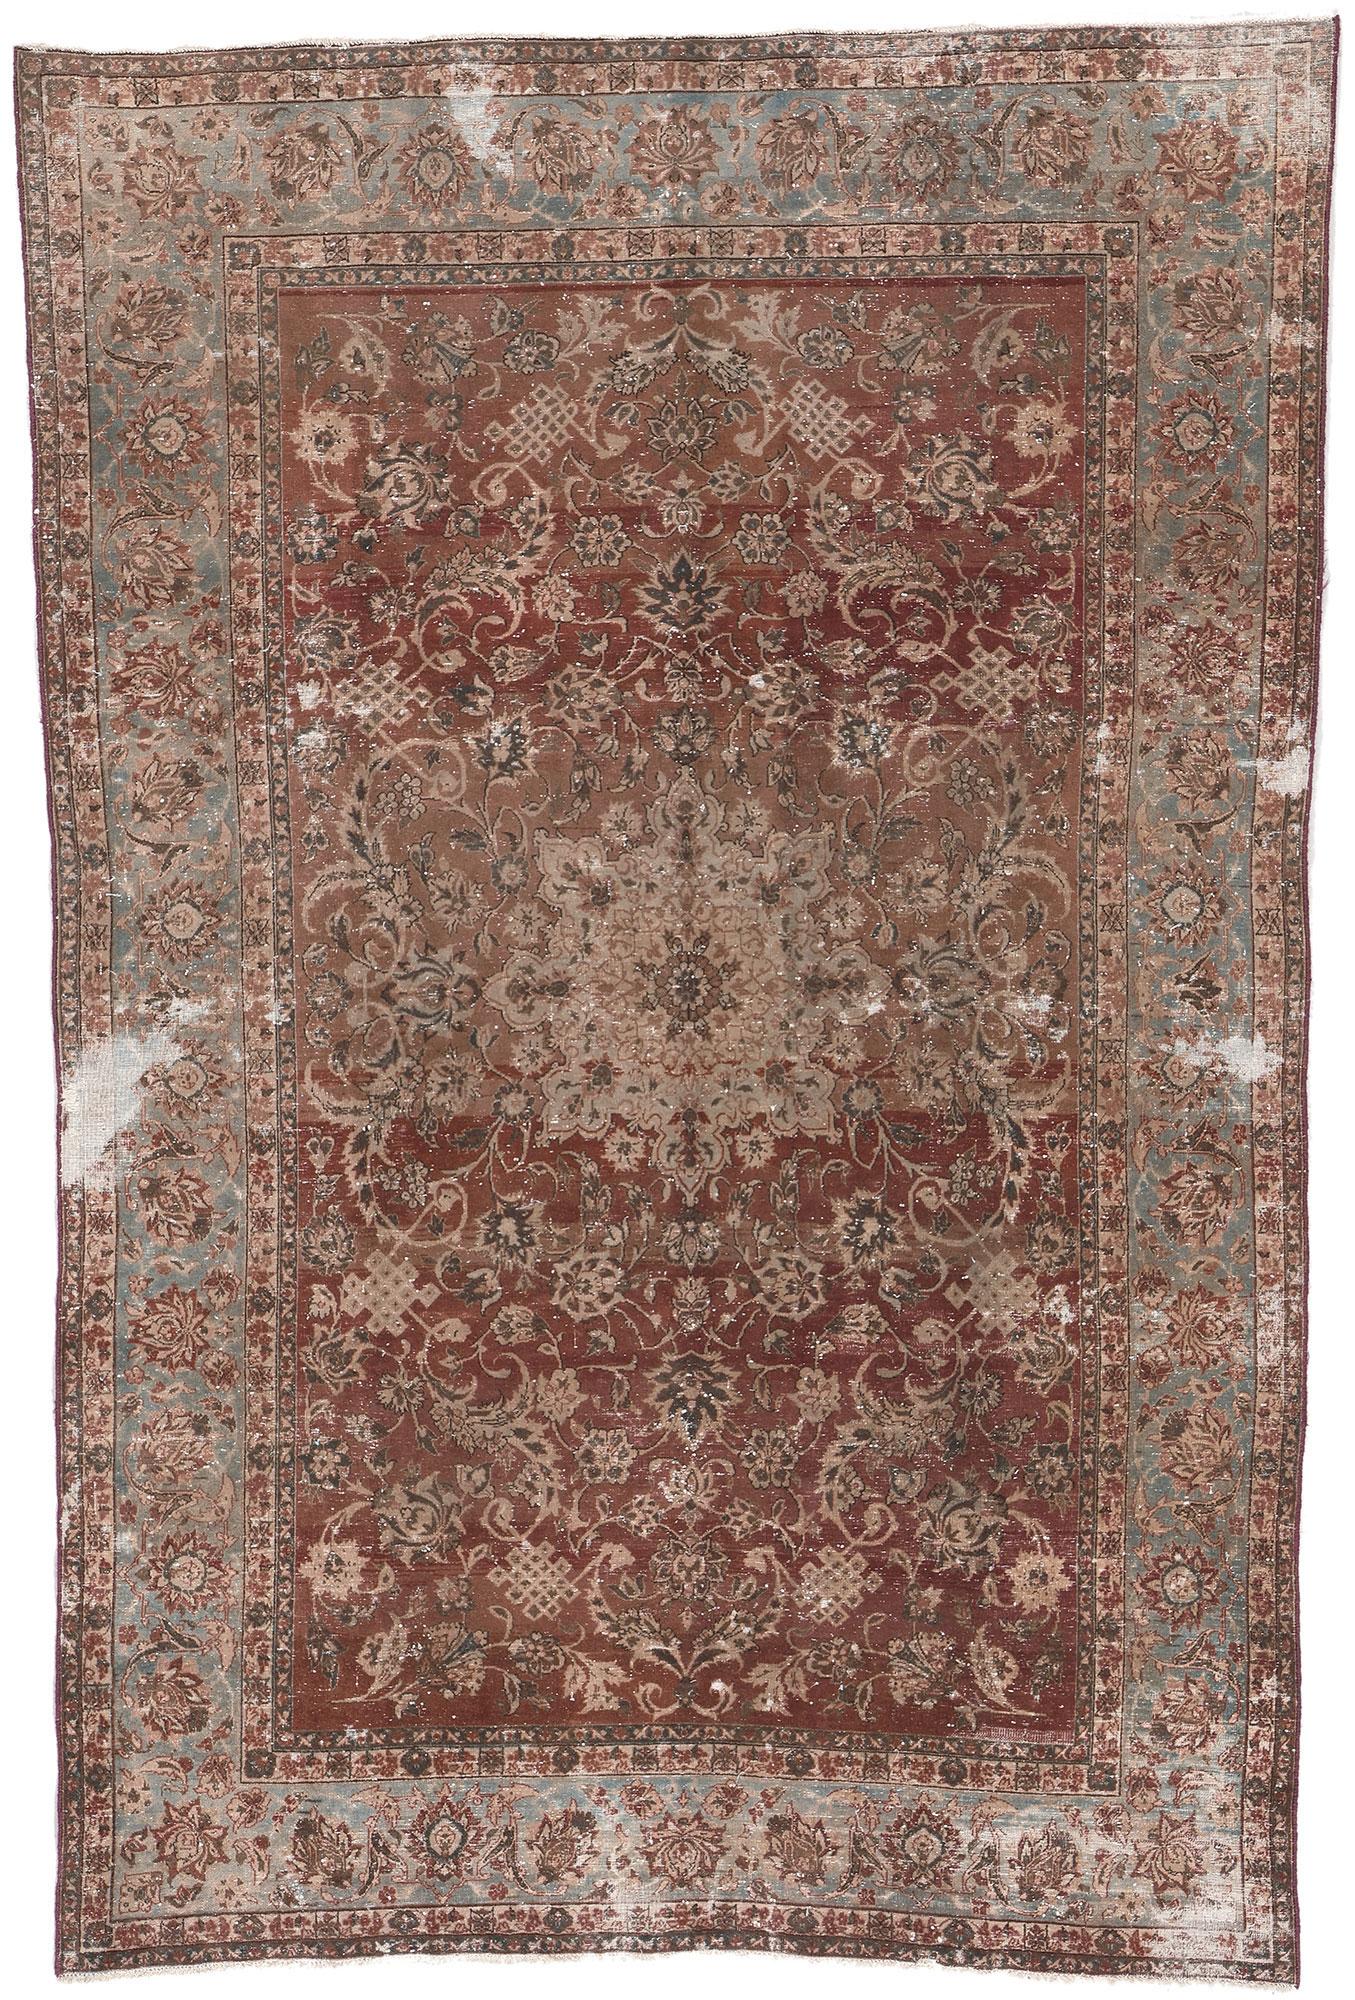 Distressed Antique Persian Tabriz Rug with Rustic Earth-Tone Colors For Sale